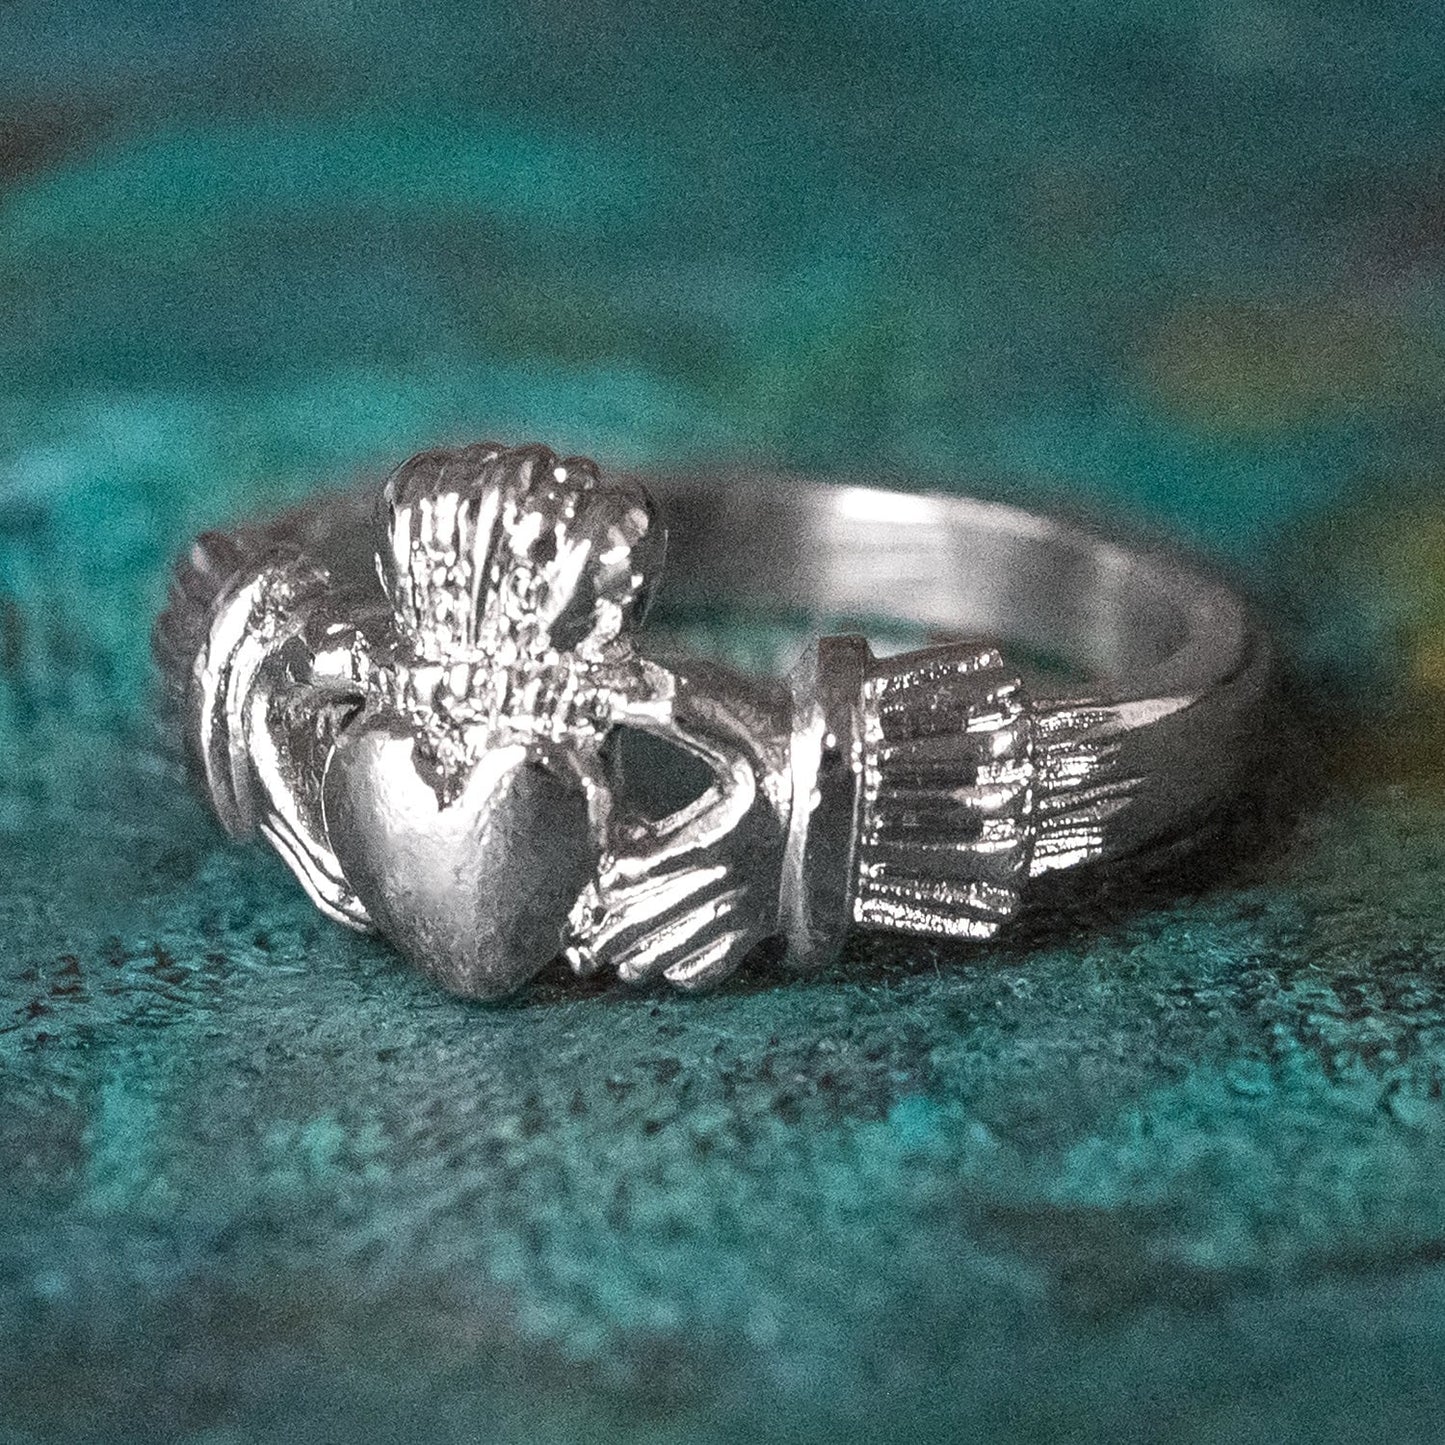 Handcrafted Vintage Ring 18k White Gold Silver Irish Claddagh Ring R1722 - Limited Stock - Never Worn